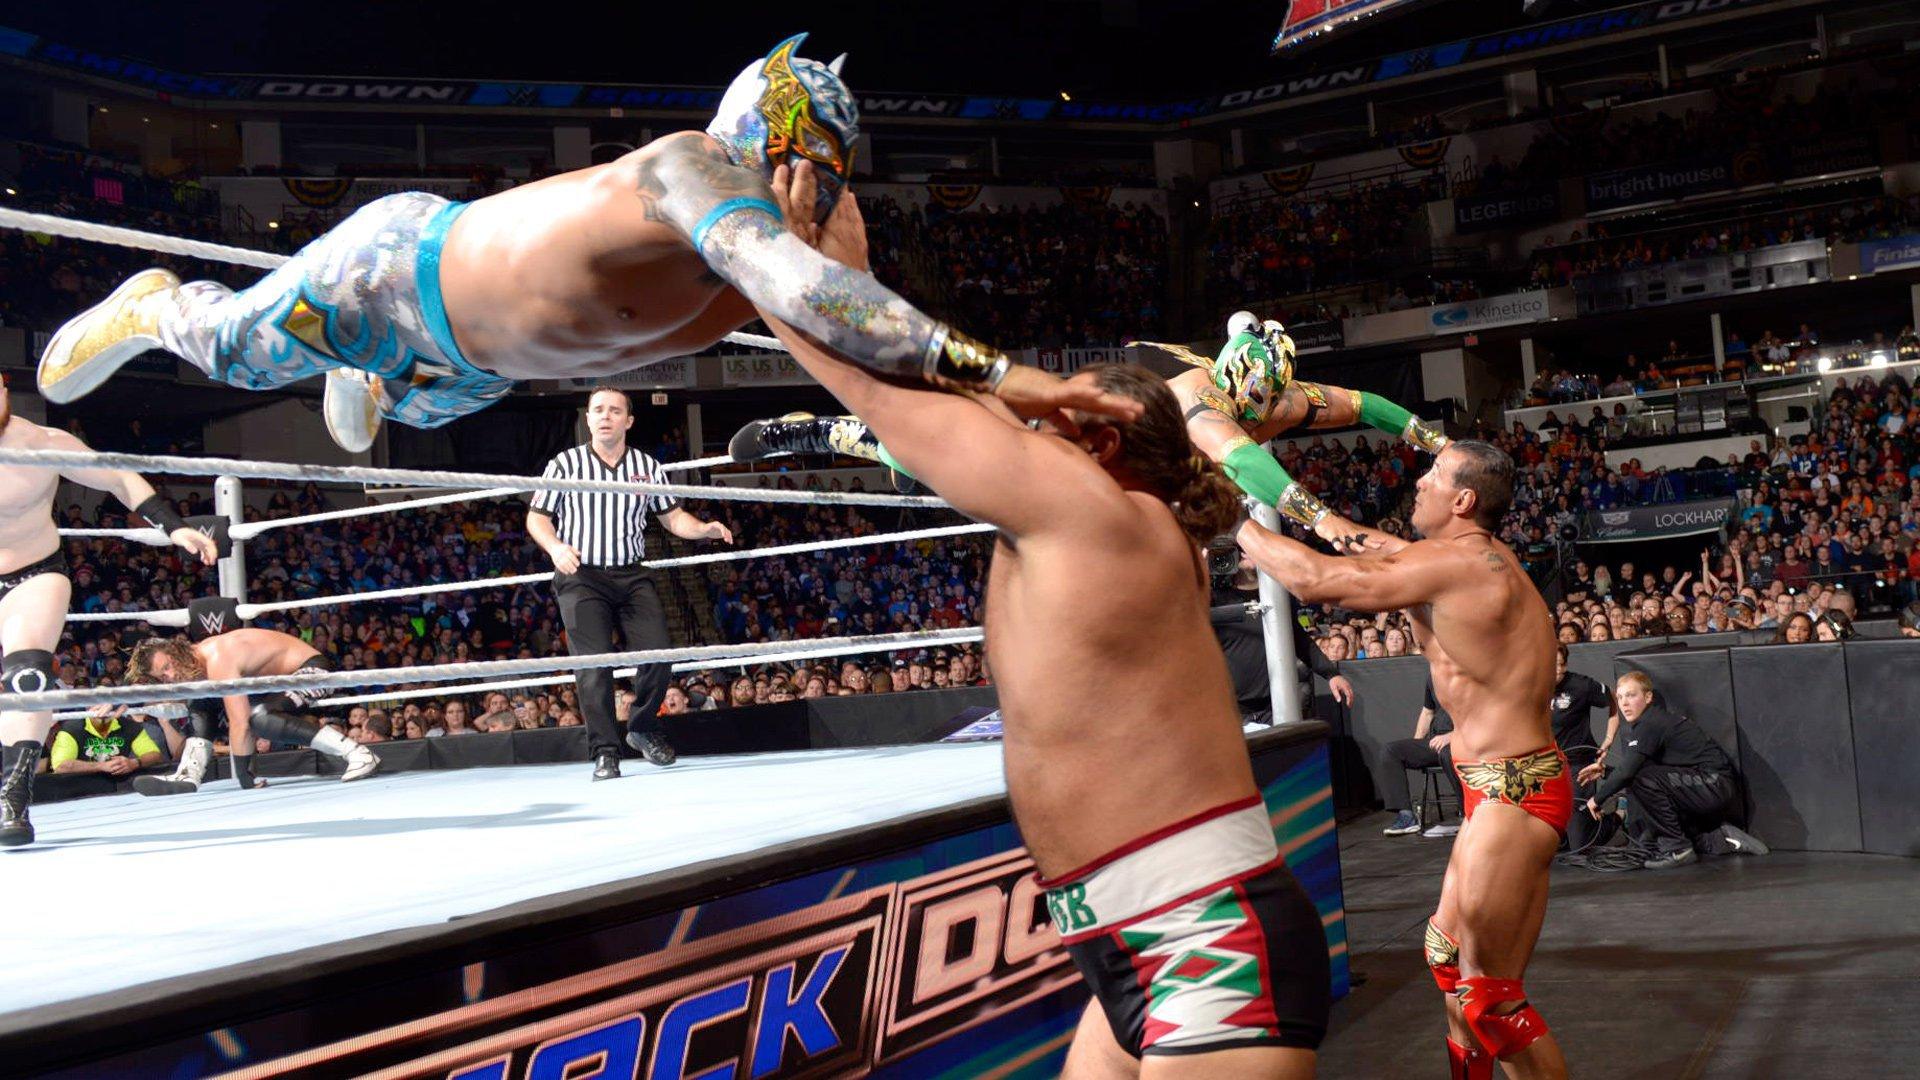 The League of Nations def. Dolph Ziggler, Neville & The Lucha Dra